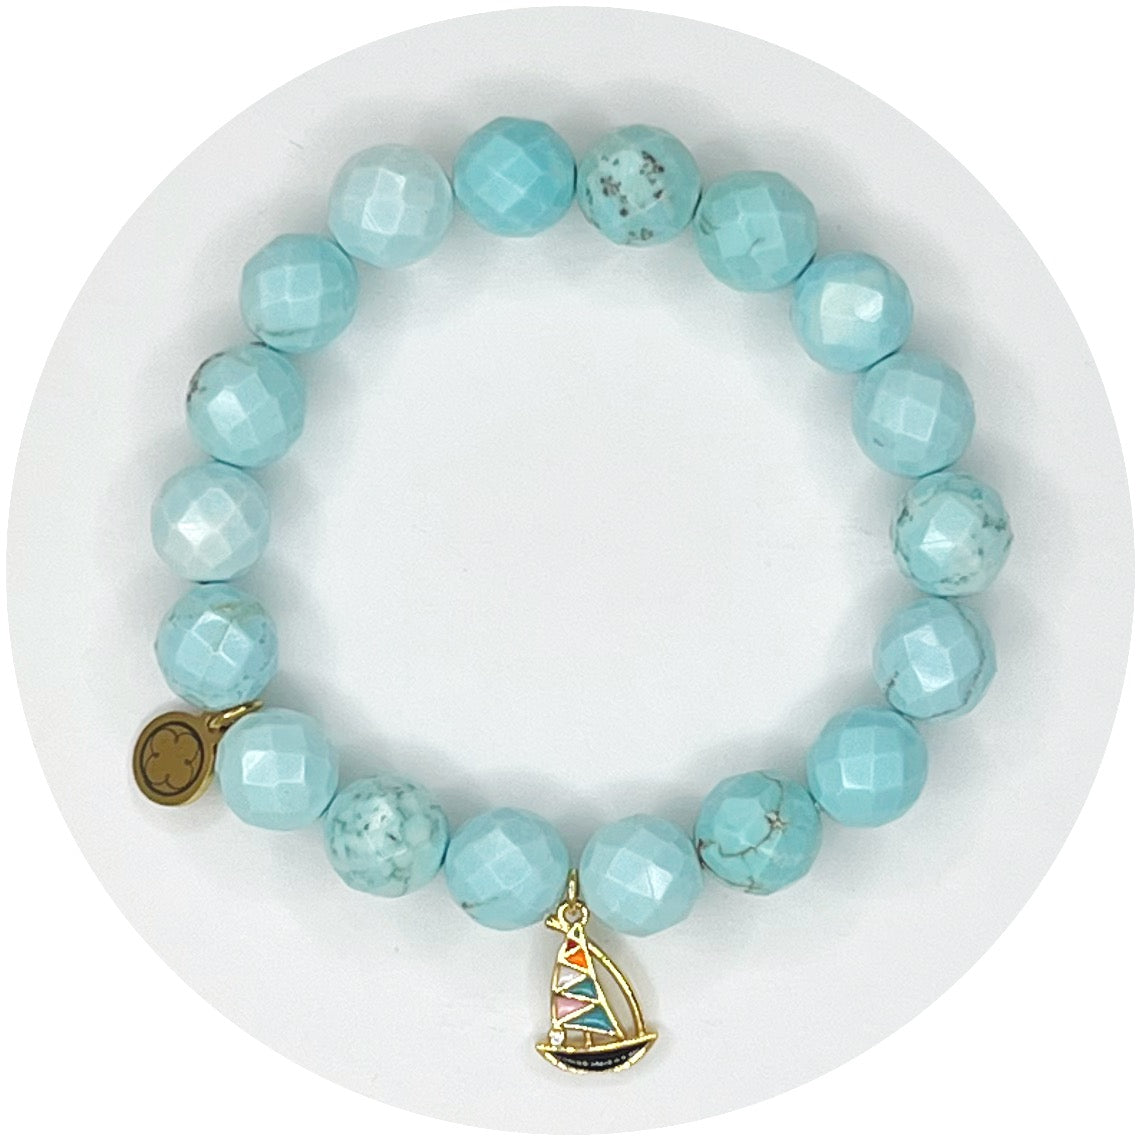 Light Turquoise Magnesite with Boat Pendant